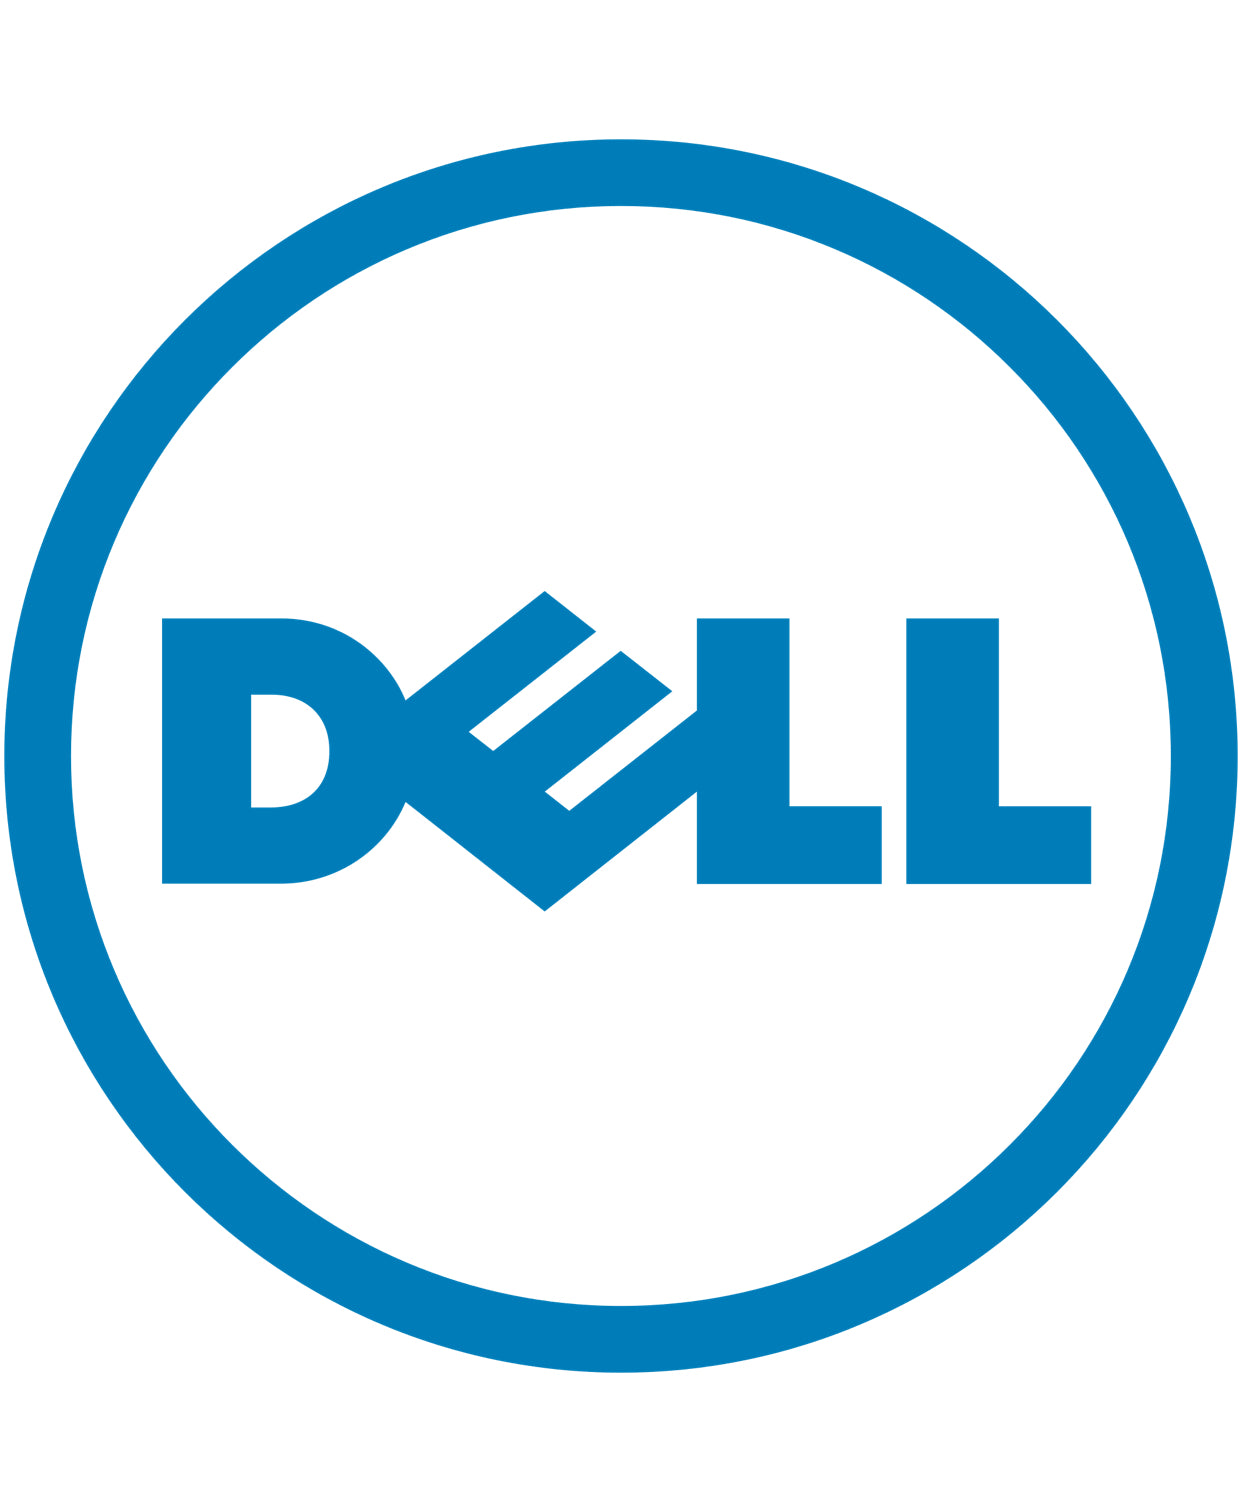 Dell Laptop Chargers